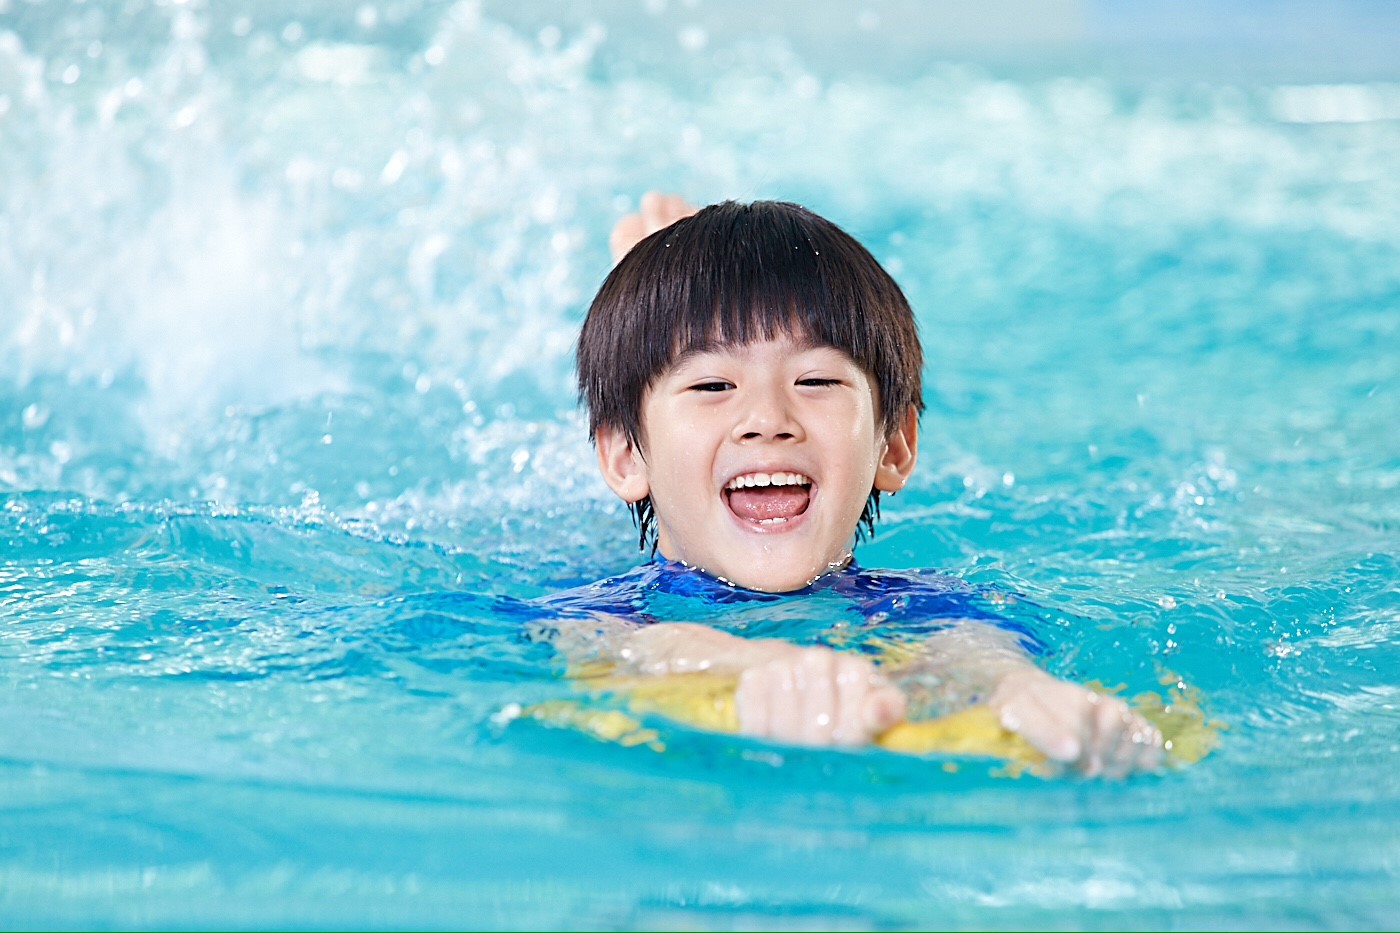 6 years old boy swimming